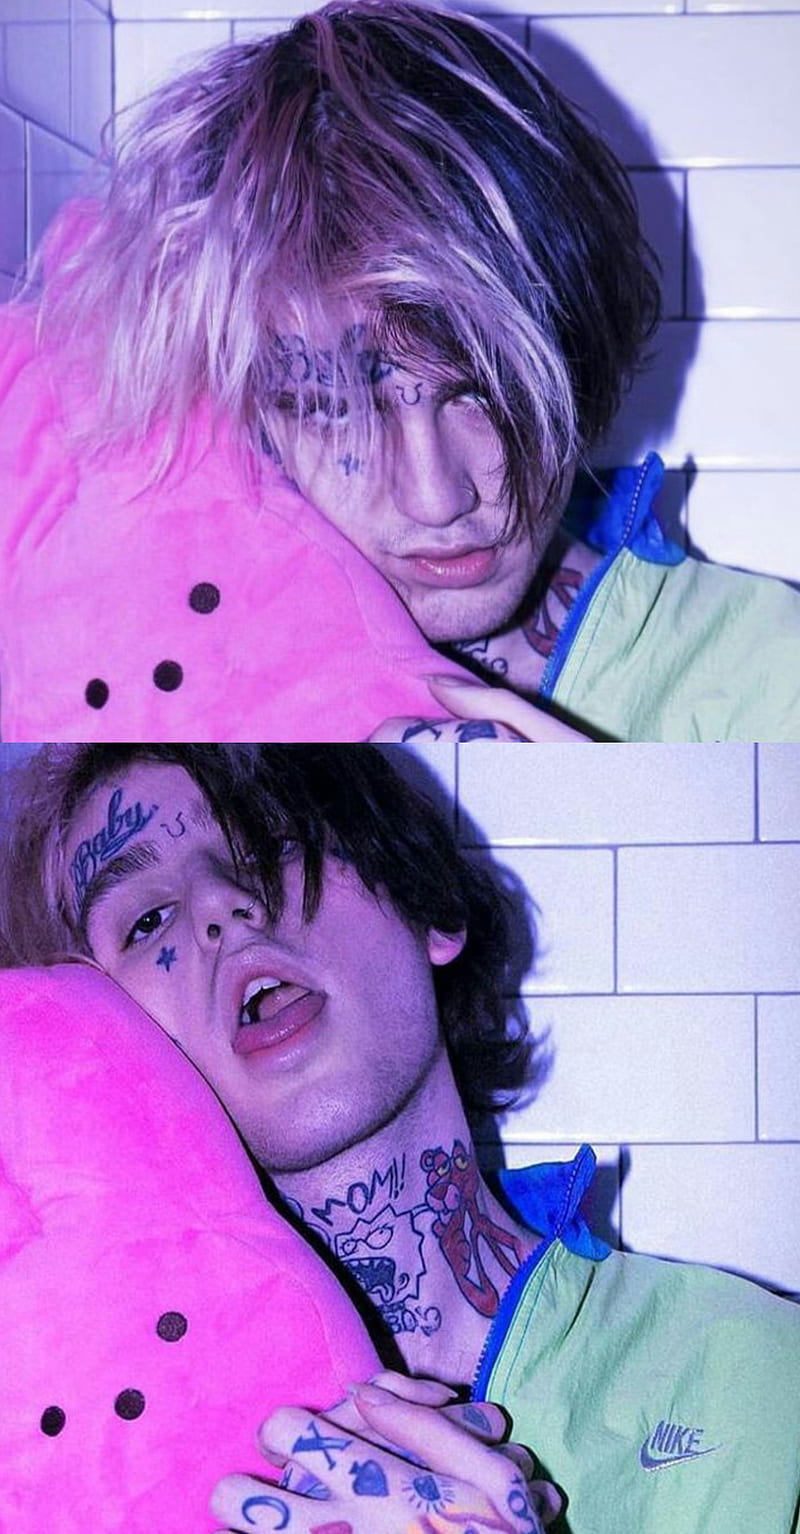 Download Lil Peep wallpapers for mobile phone, free Lil Peep HD pictures